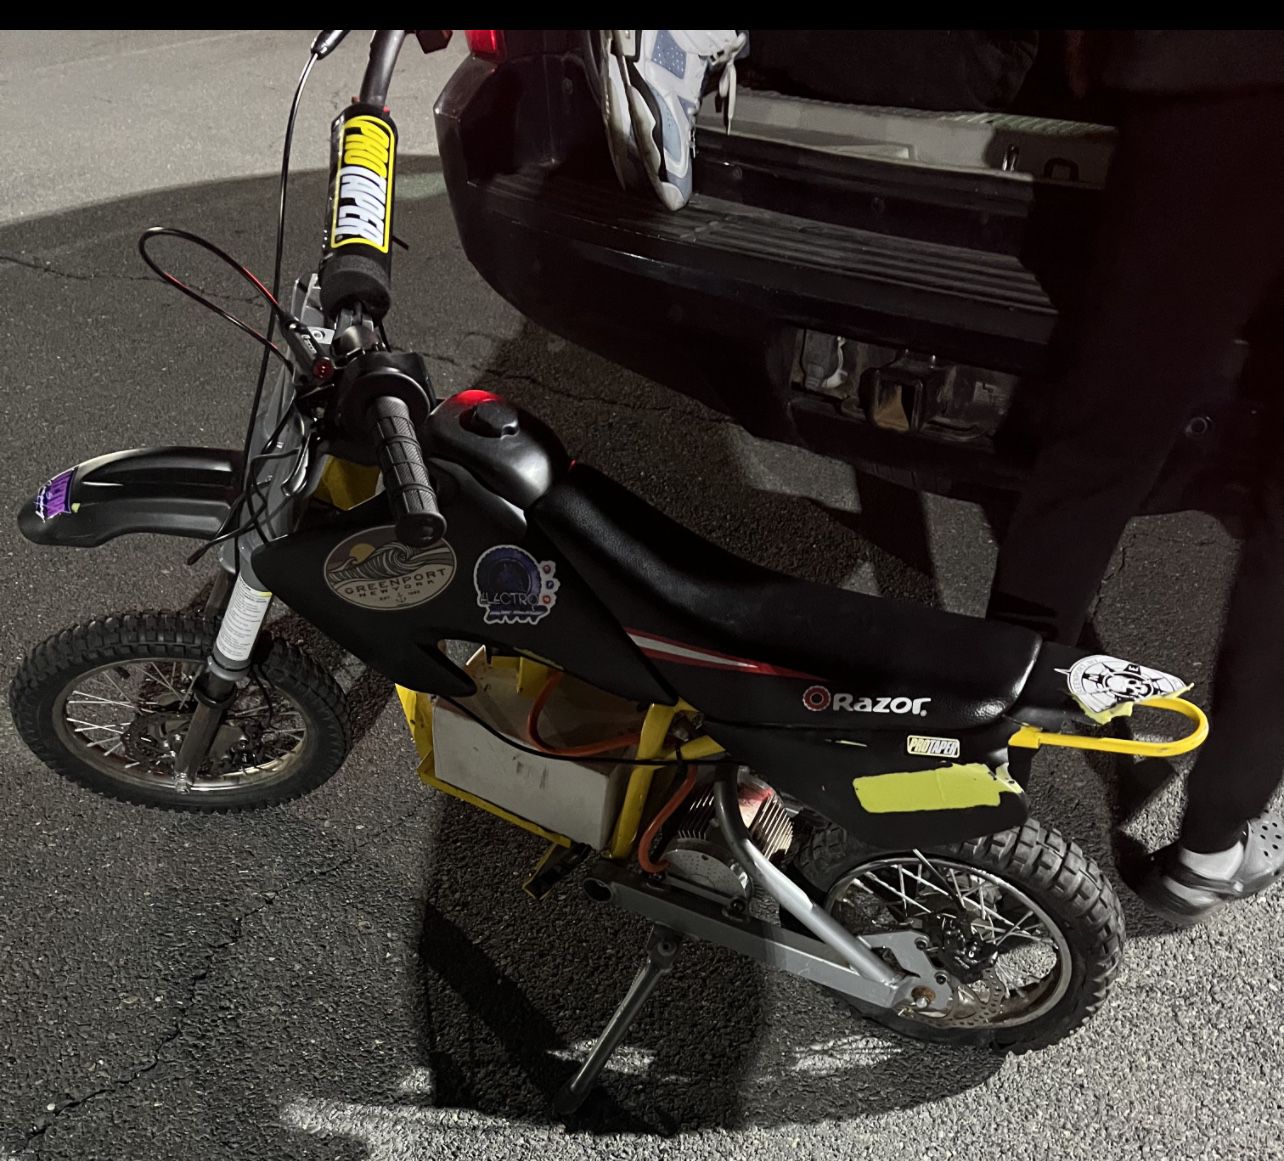 small dirt bike for sale 